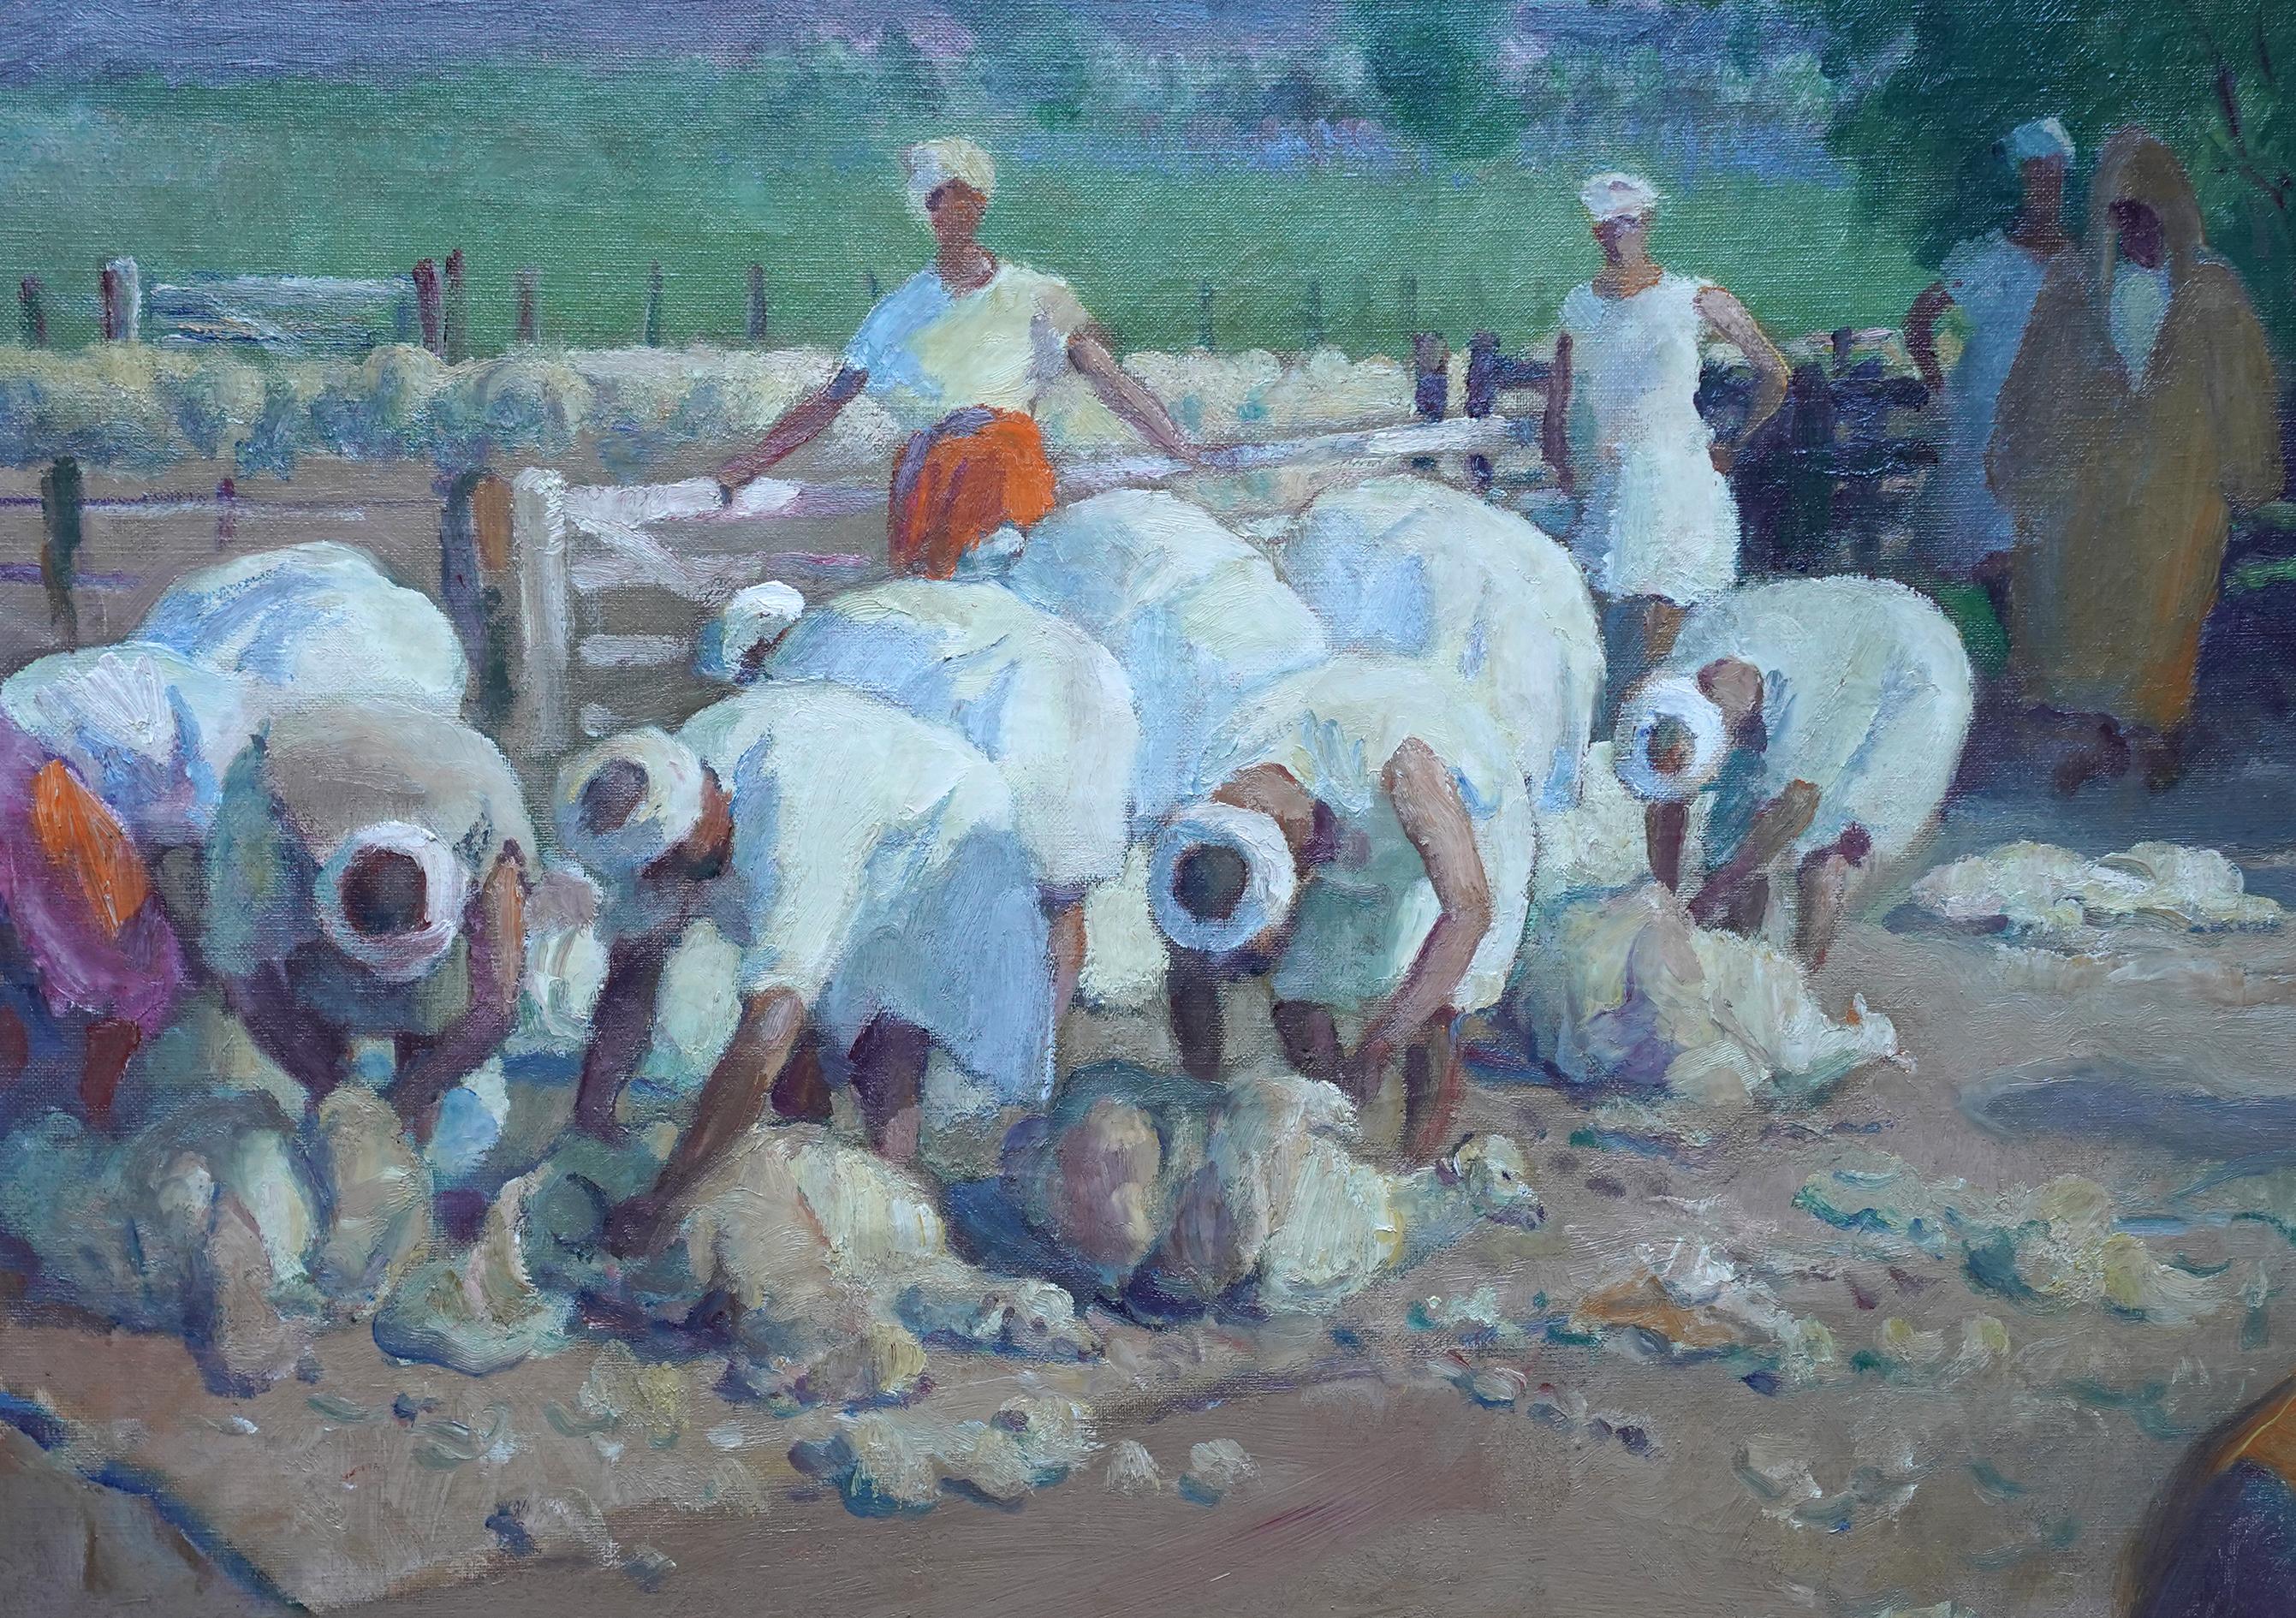 Sheep Shearers, Tangiers - British 1920's Orientalist figurative oil painting - Post-Impressionist Painting by Spencer Pryse